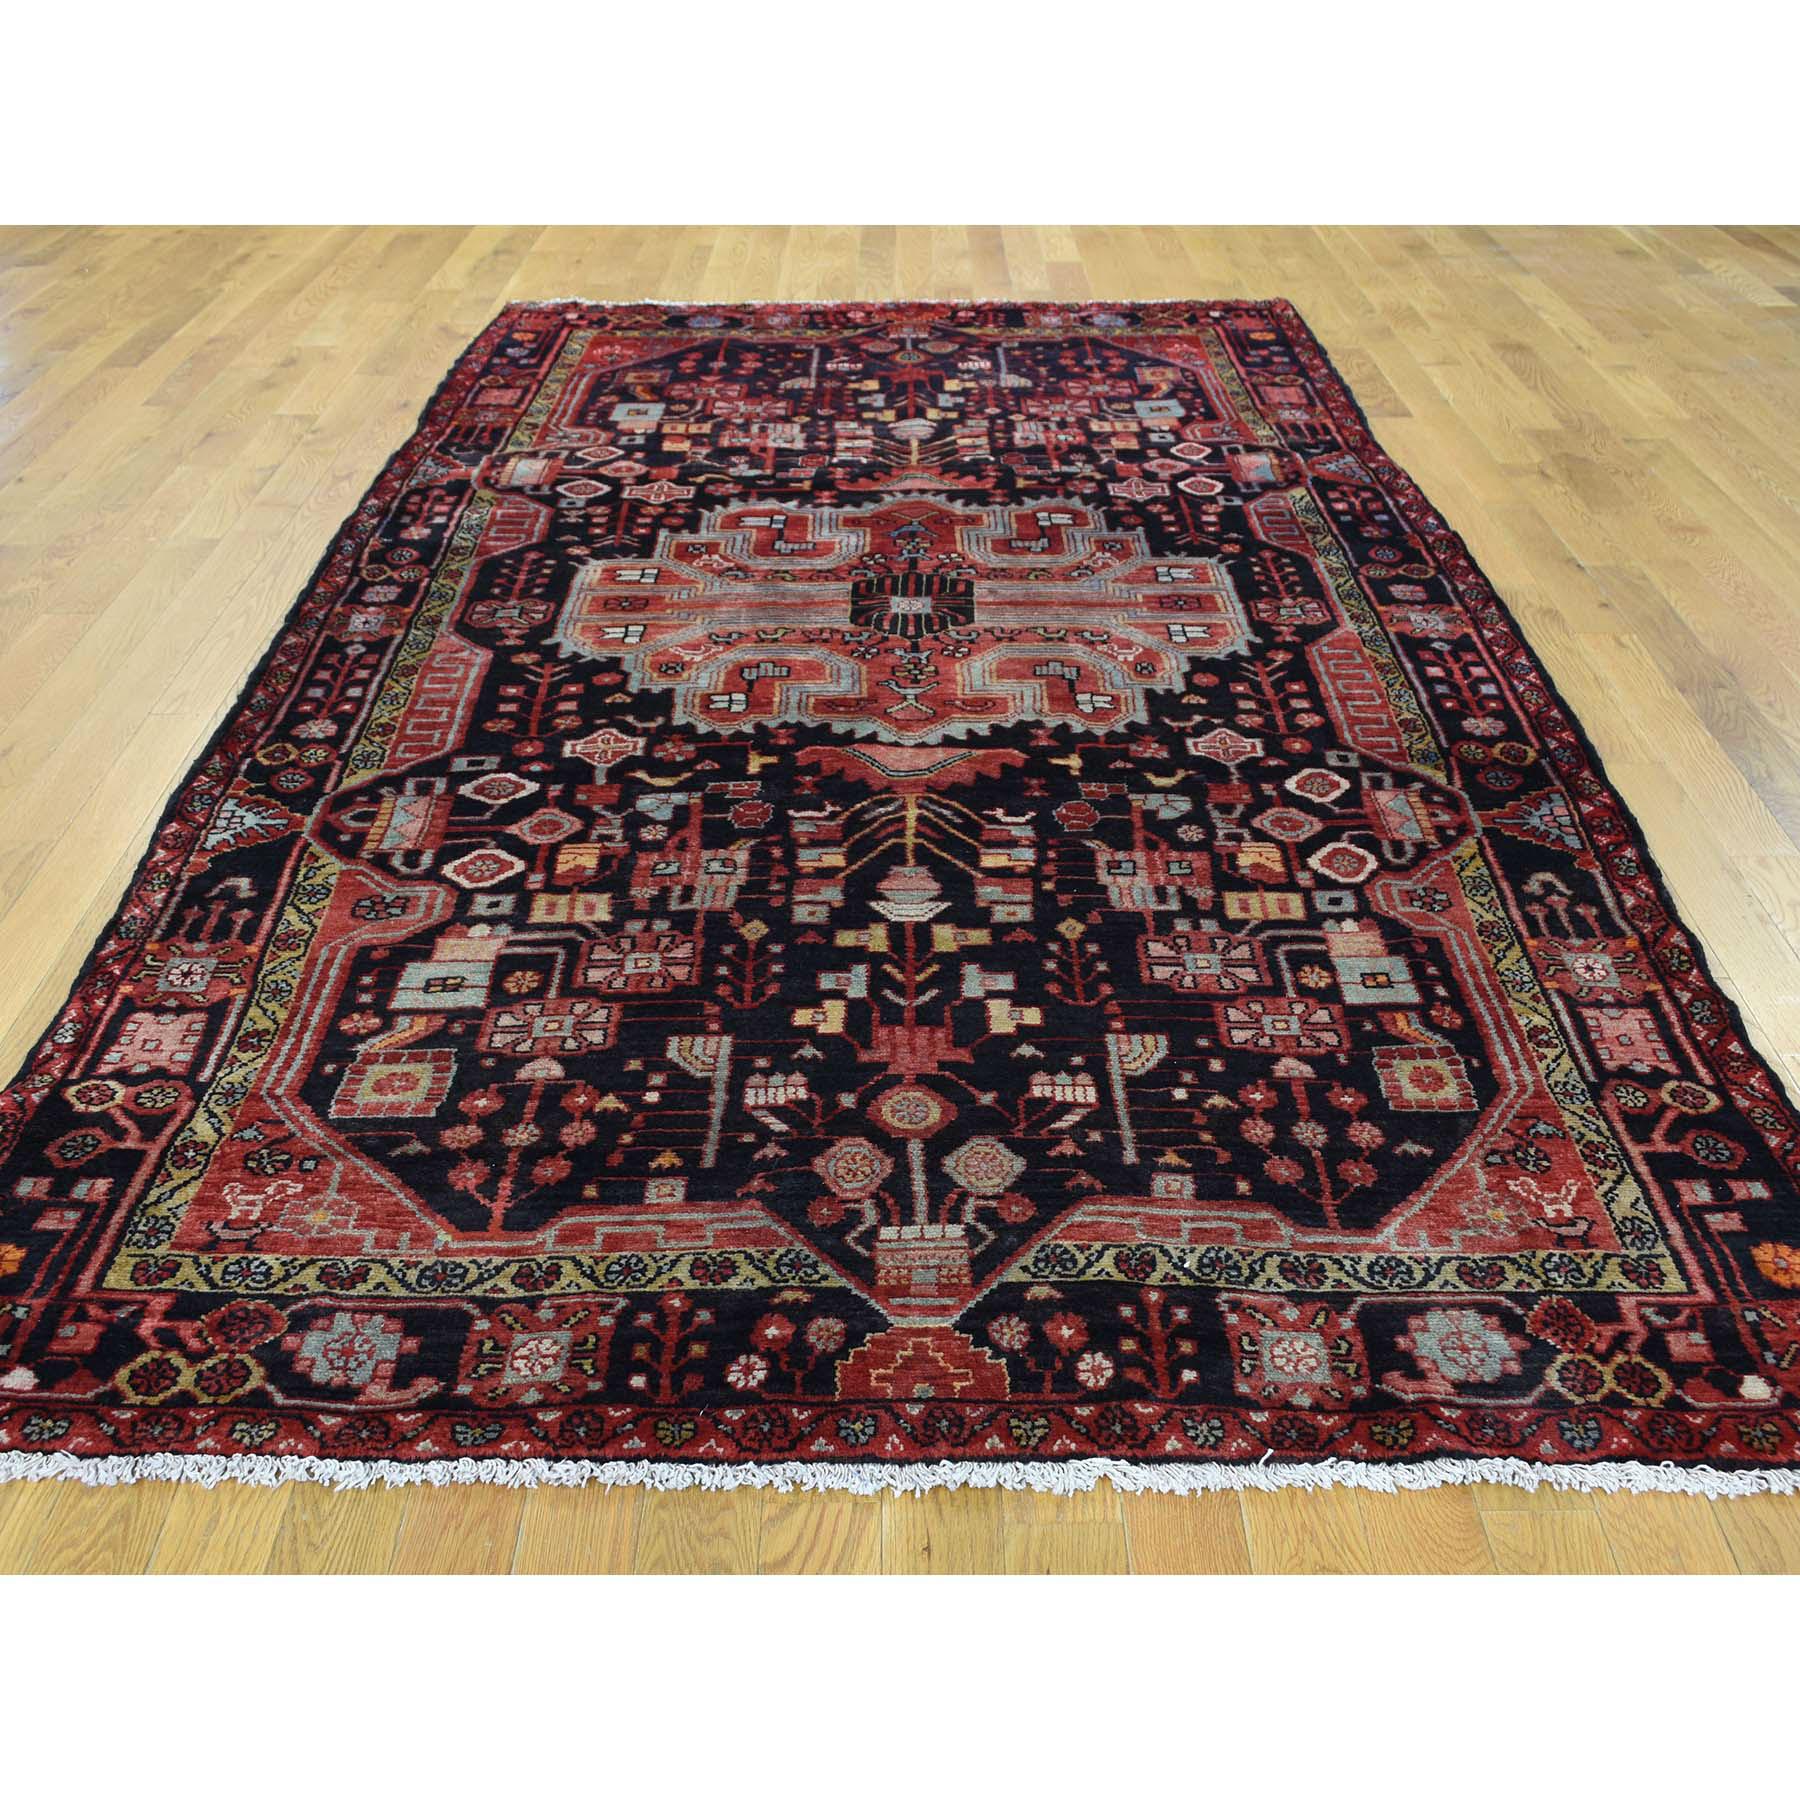 This is a truly genuine one-of-a-kind Persian Nahavan Full Pile Mint Condition Semi Antique Runner. It was made in the centuries-old Persian weaving craftsmanship techniques by expert artisans.

 Primary materials: Wool
 Latex: No
 Pile height: